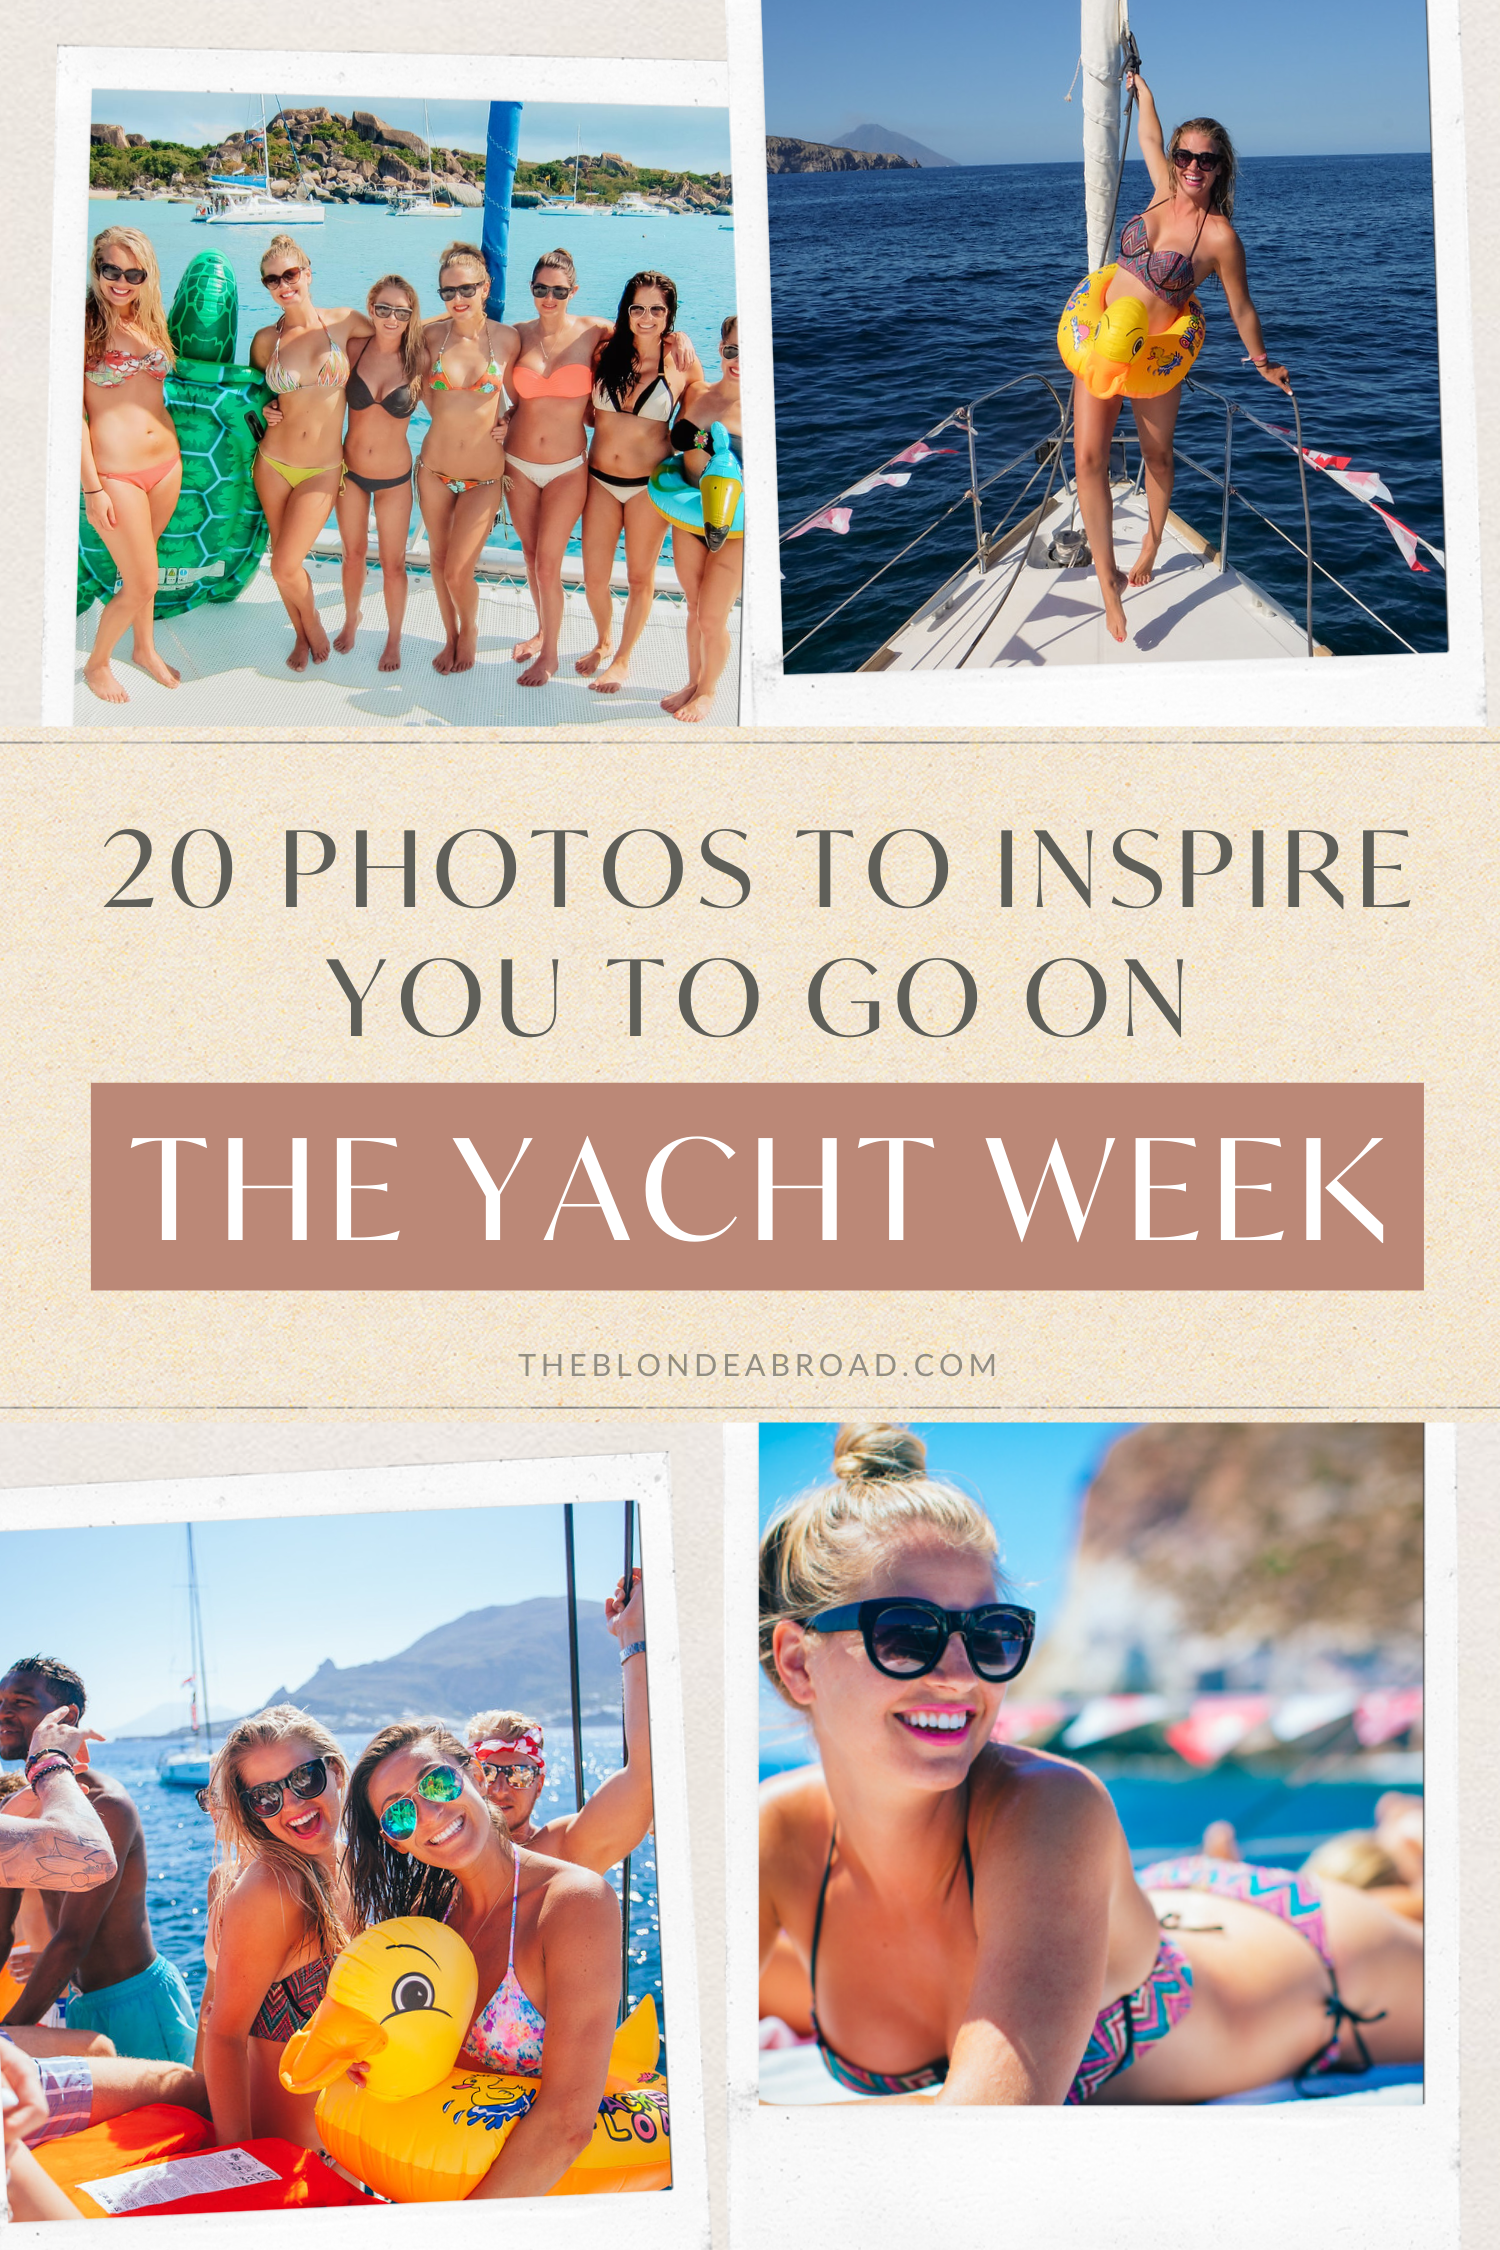 20 Photos to Inspire You to Go on The Yacht Week